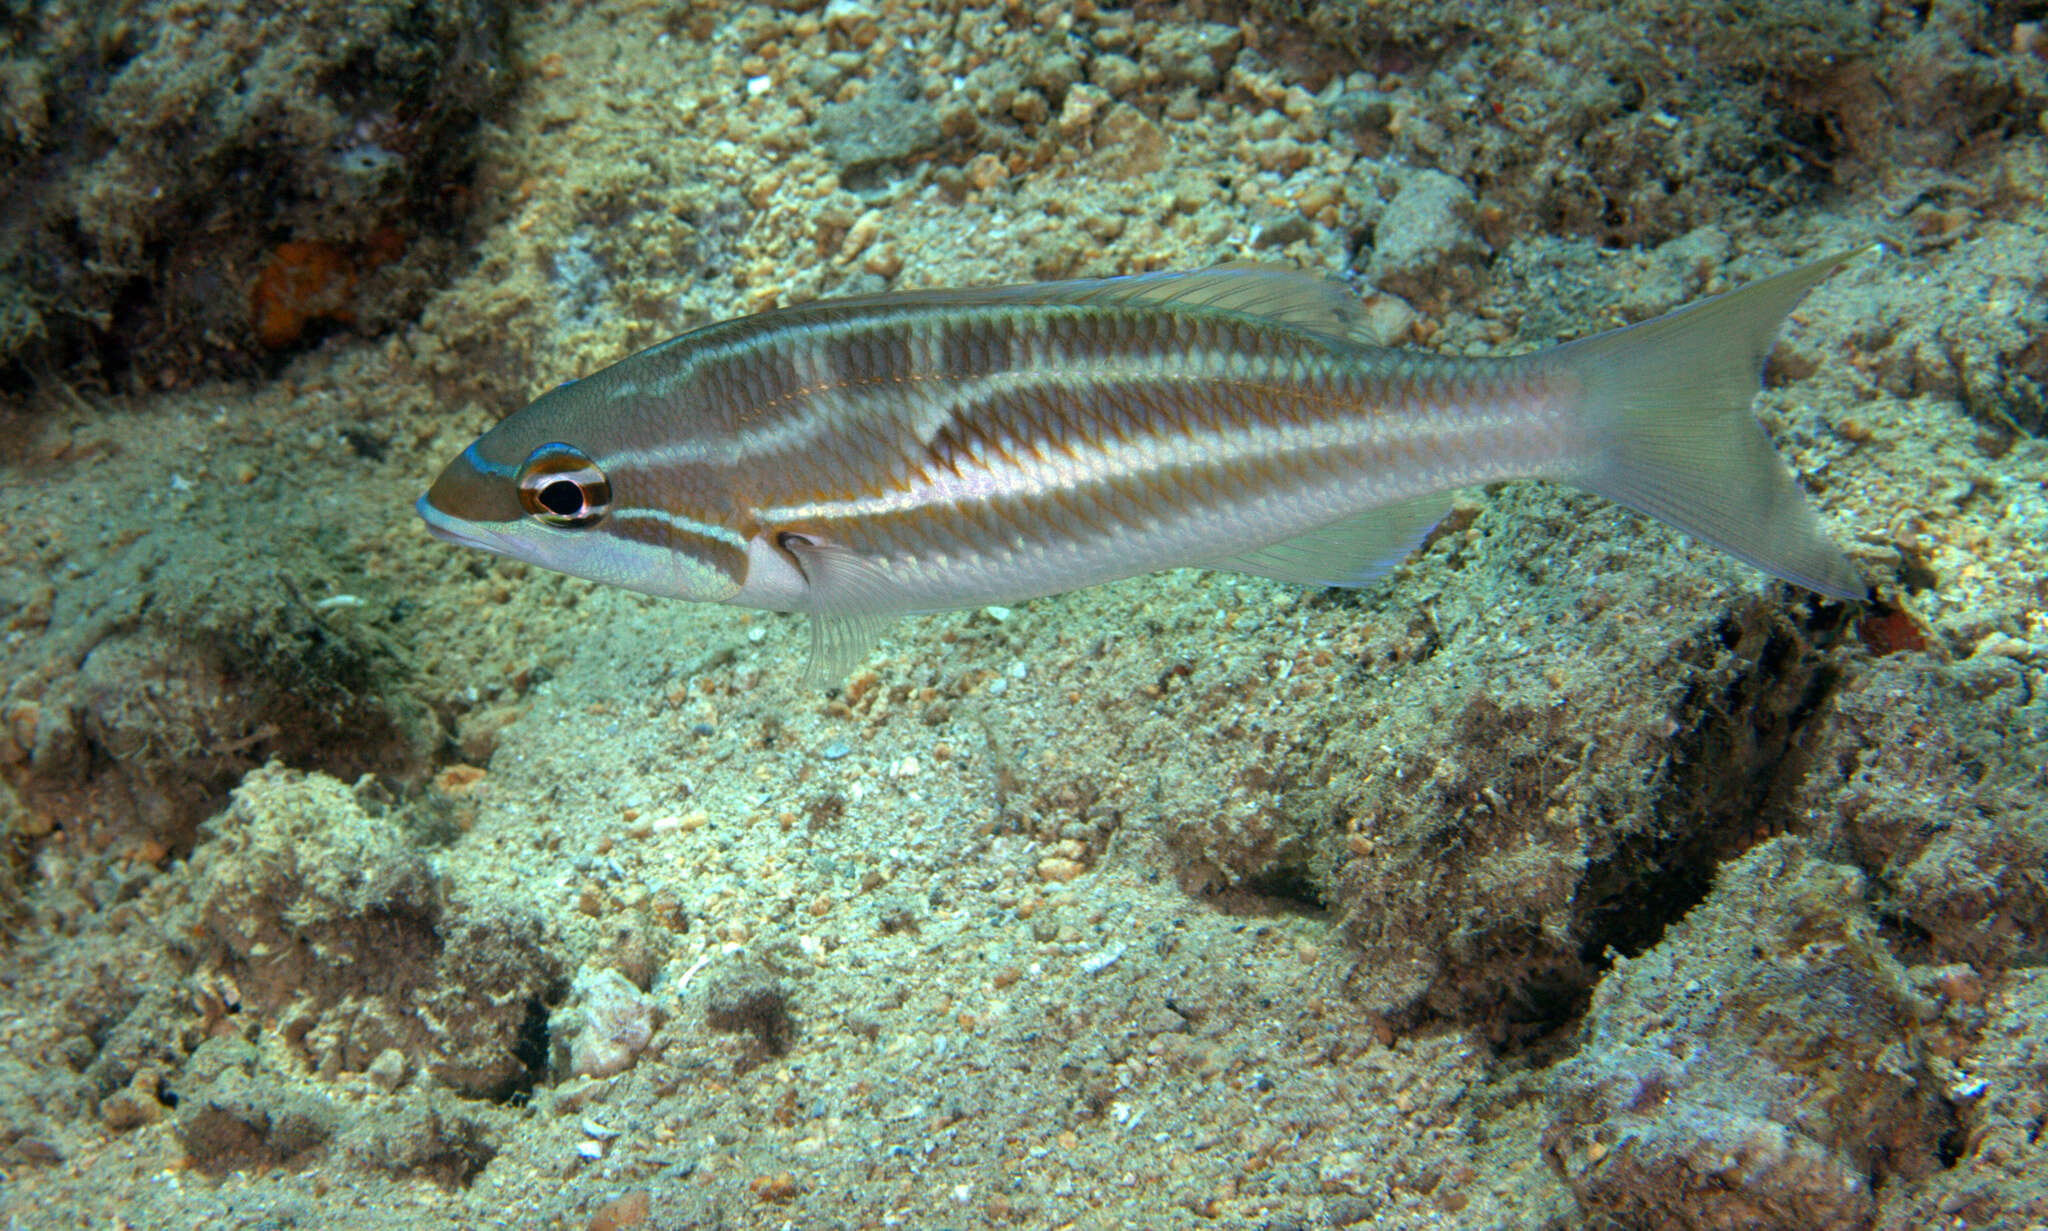 Image of Three-striped whiptail